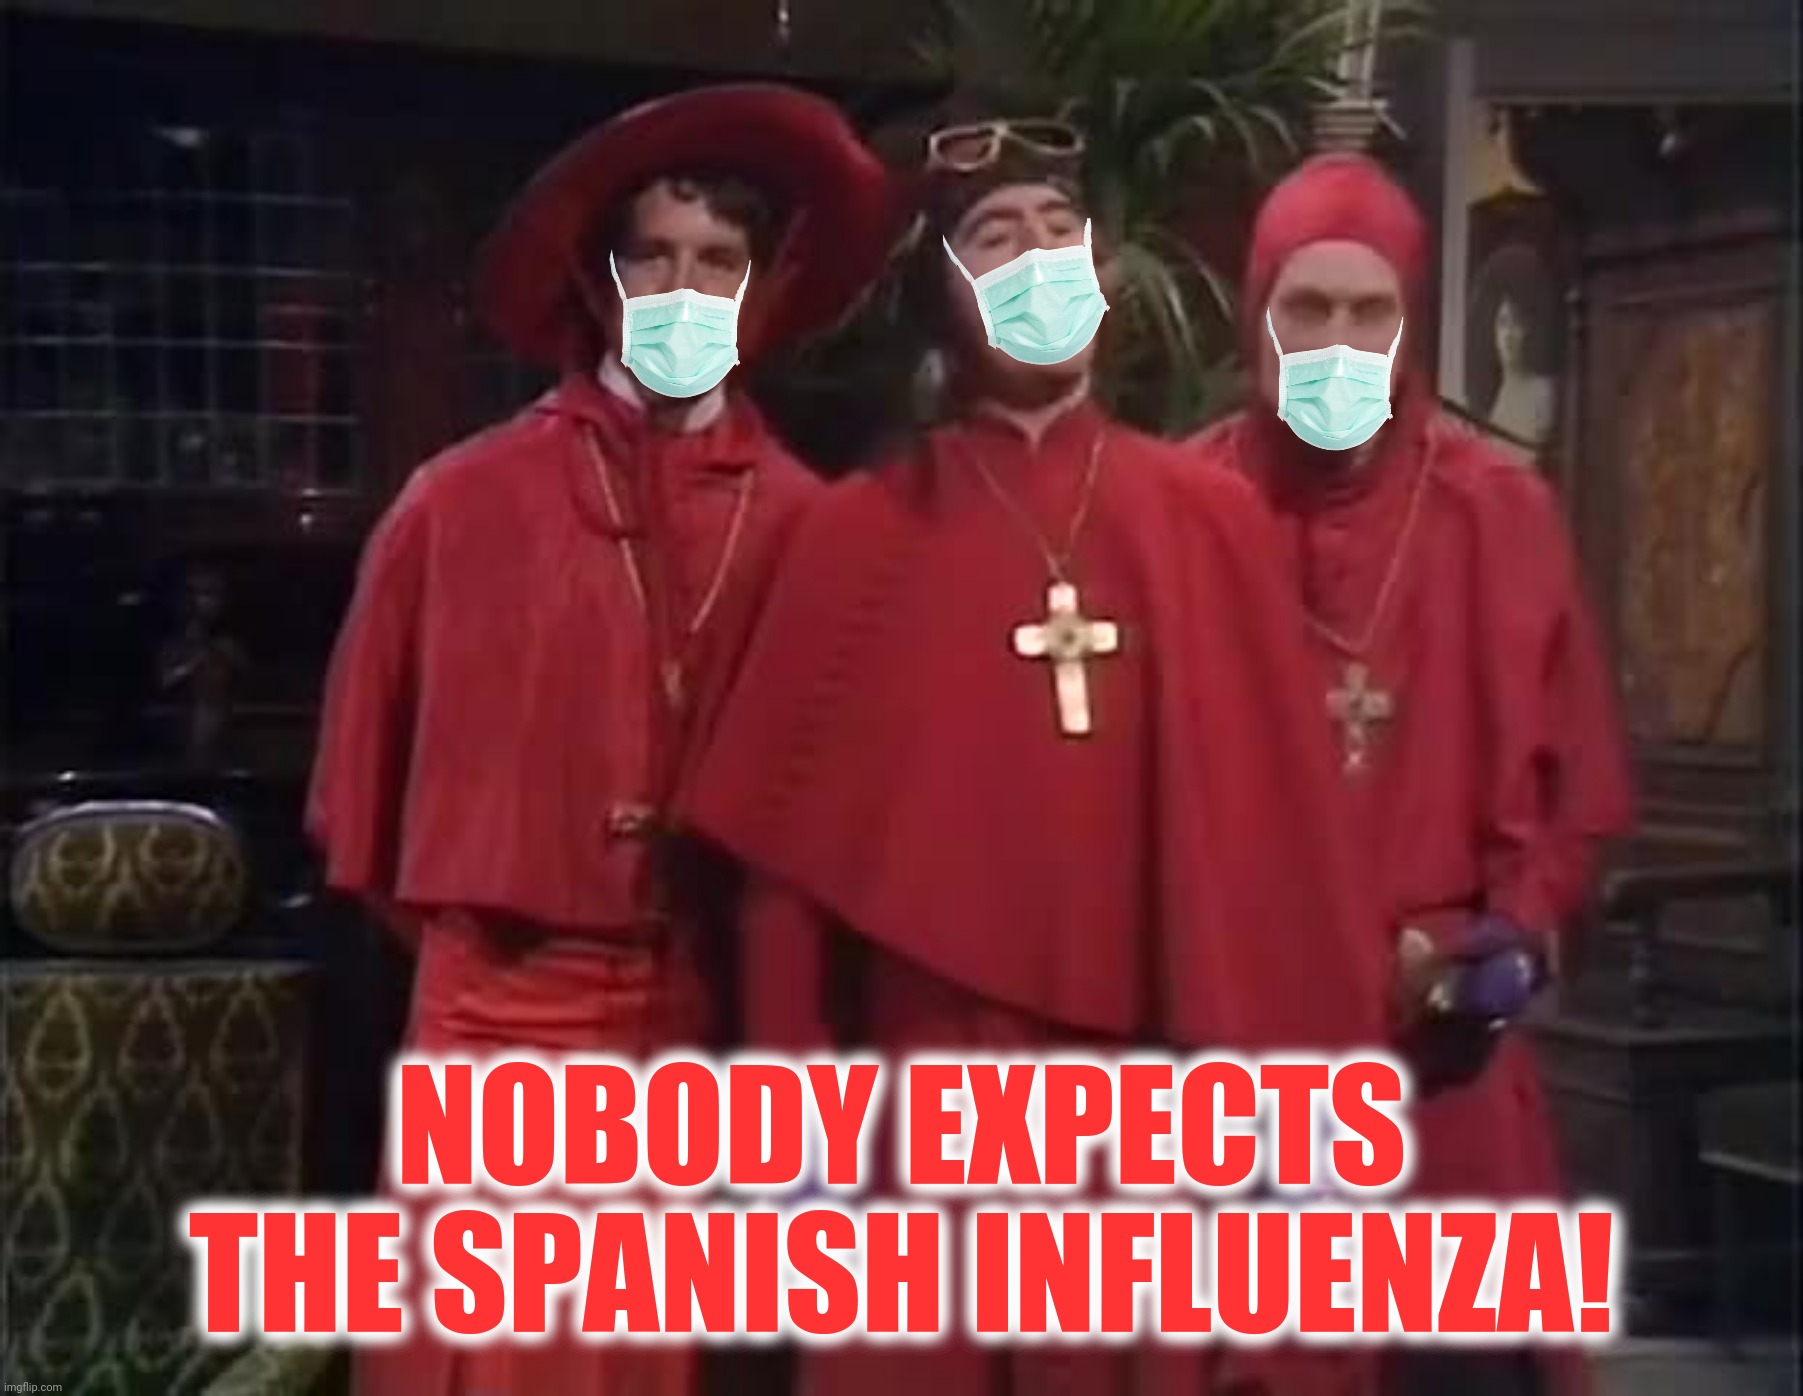 And now for something completely different | NOBODY EXPECTS THE SPANISH INFLUENZA! | image tagged in bad photoshop,nobody expects the spanish inquisition monty python,corona virus,spanish influenza | made w/ Imgflip meme maker